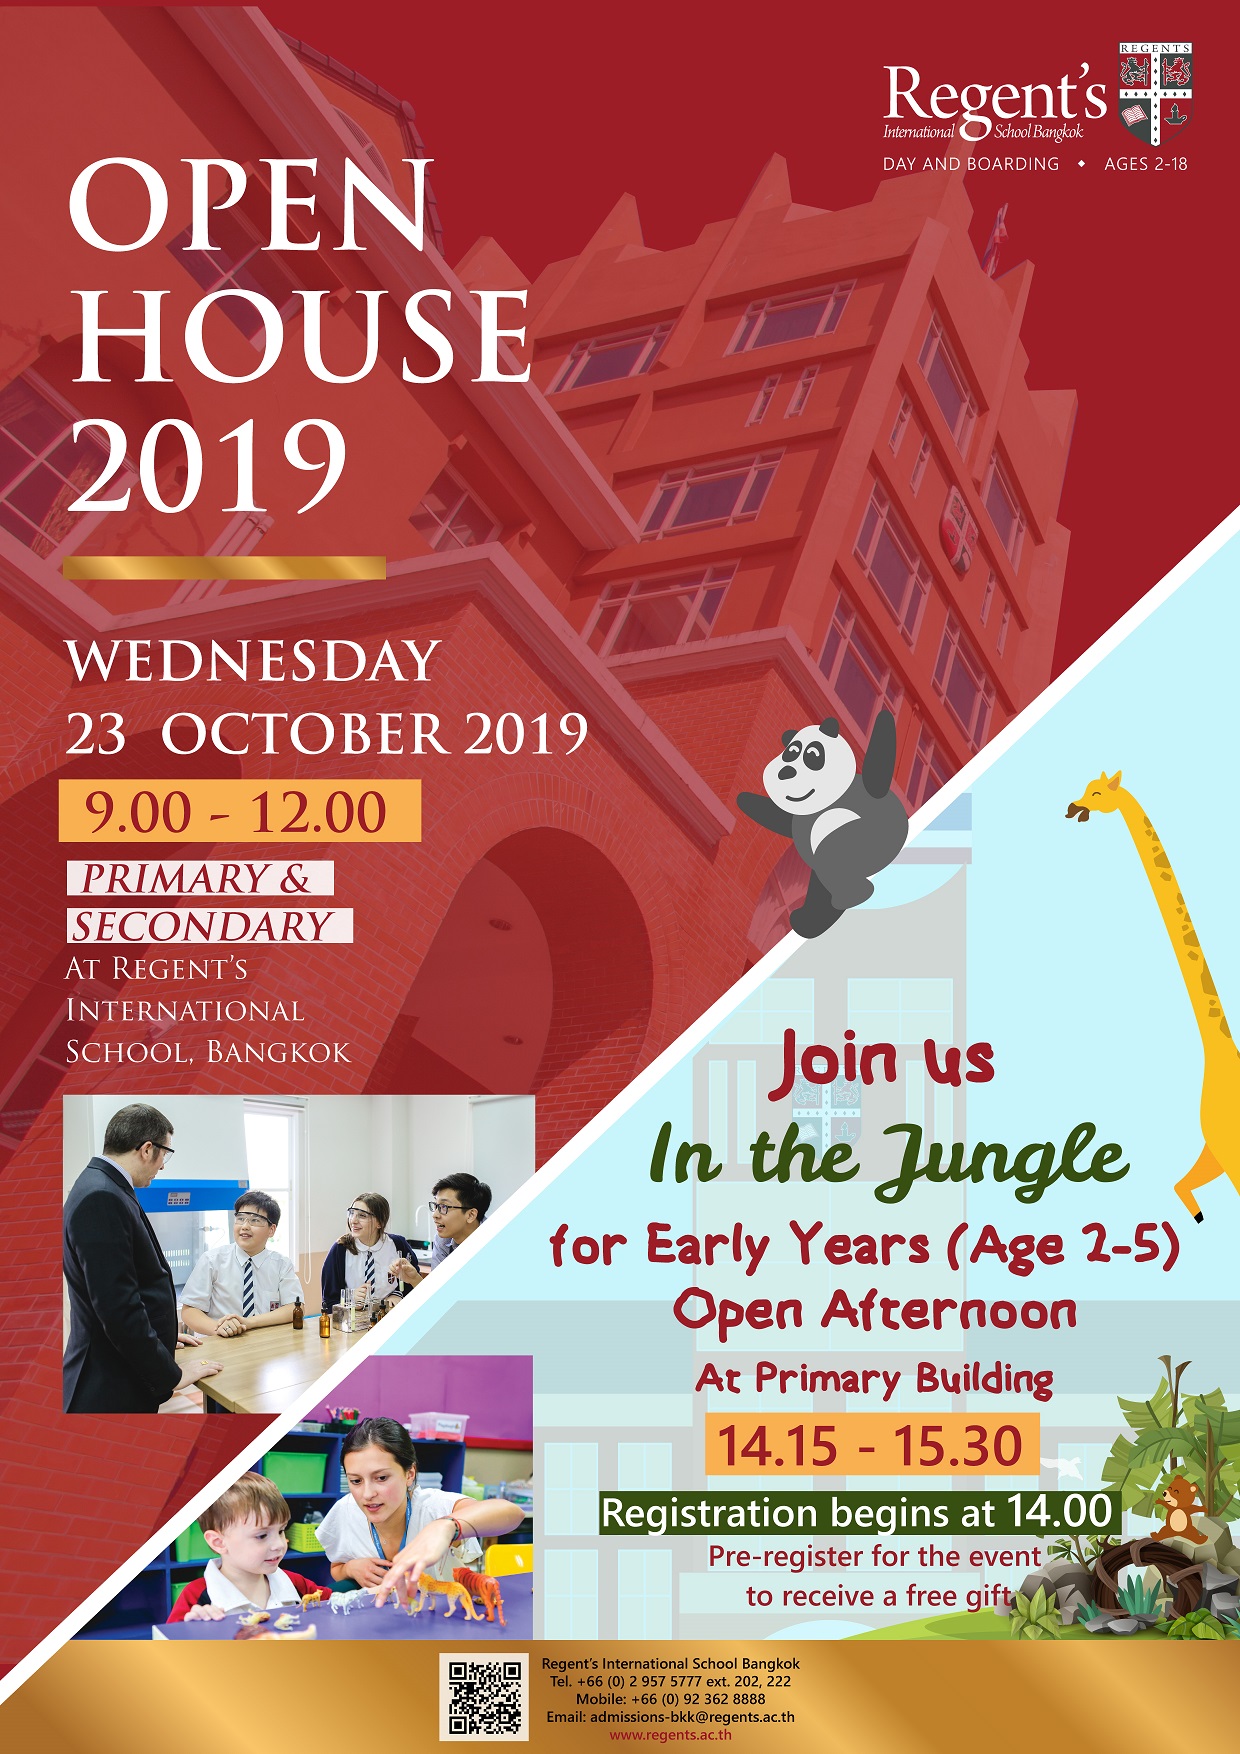 Open House on 23 October 2019